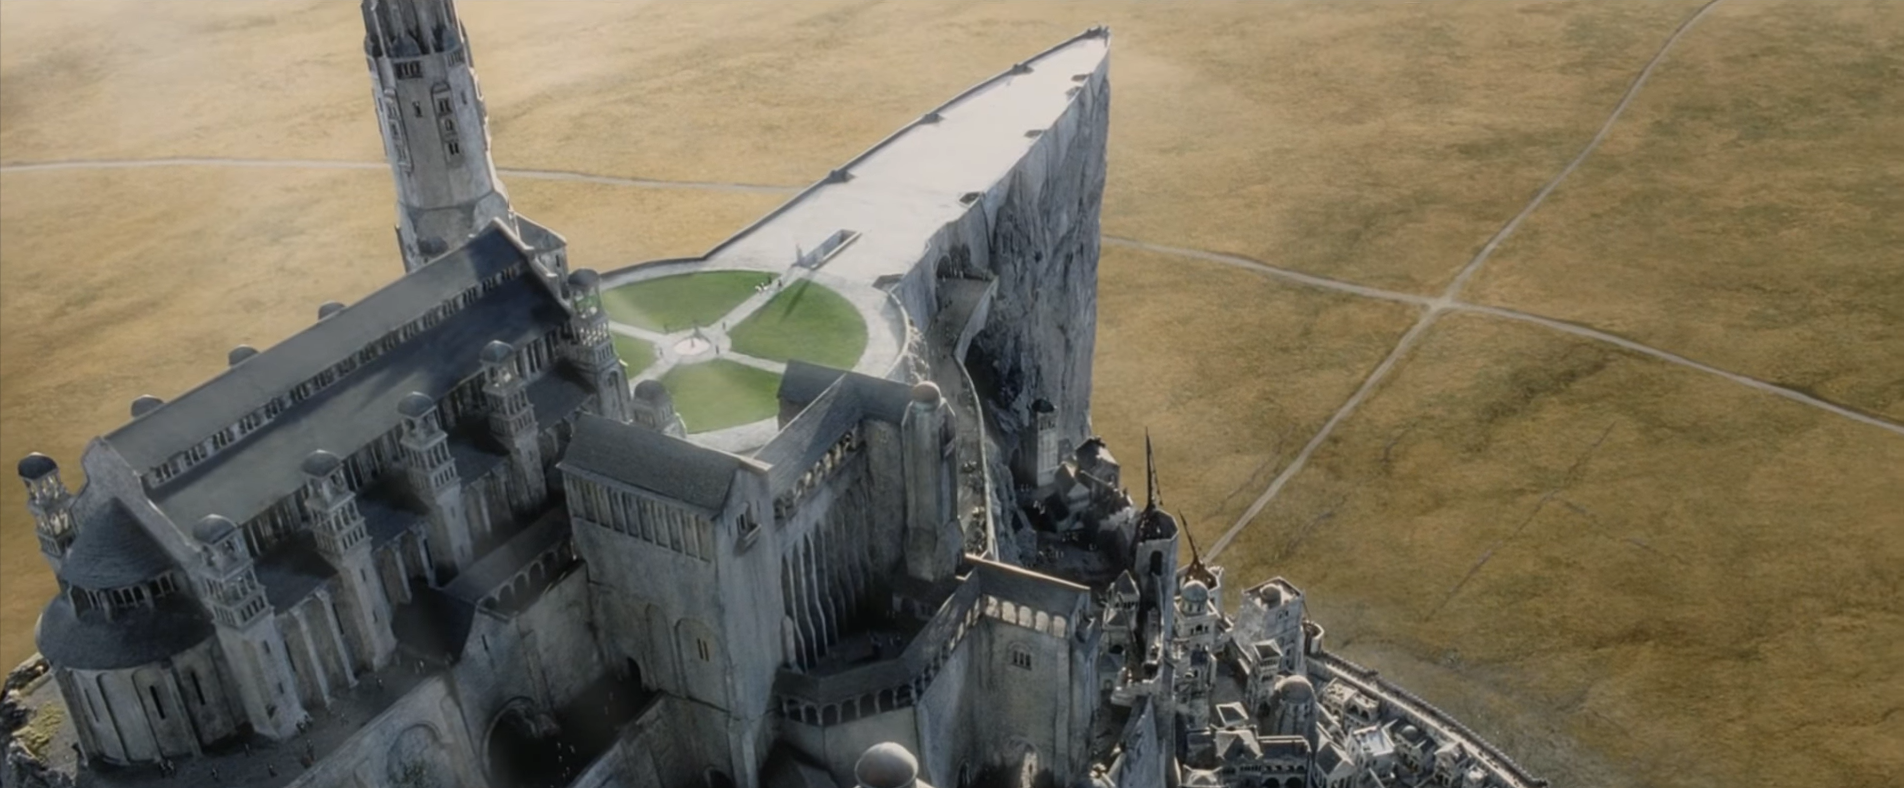 The Lord of the Rings - Minas Tirith